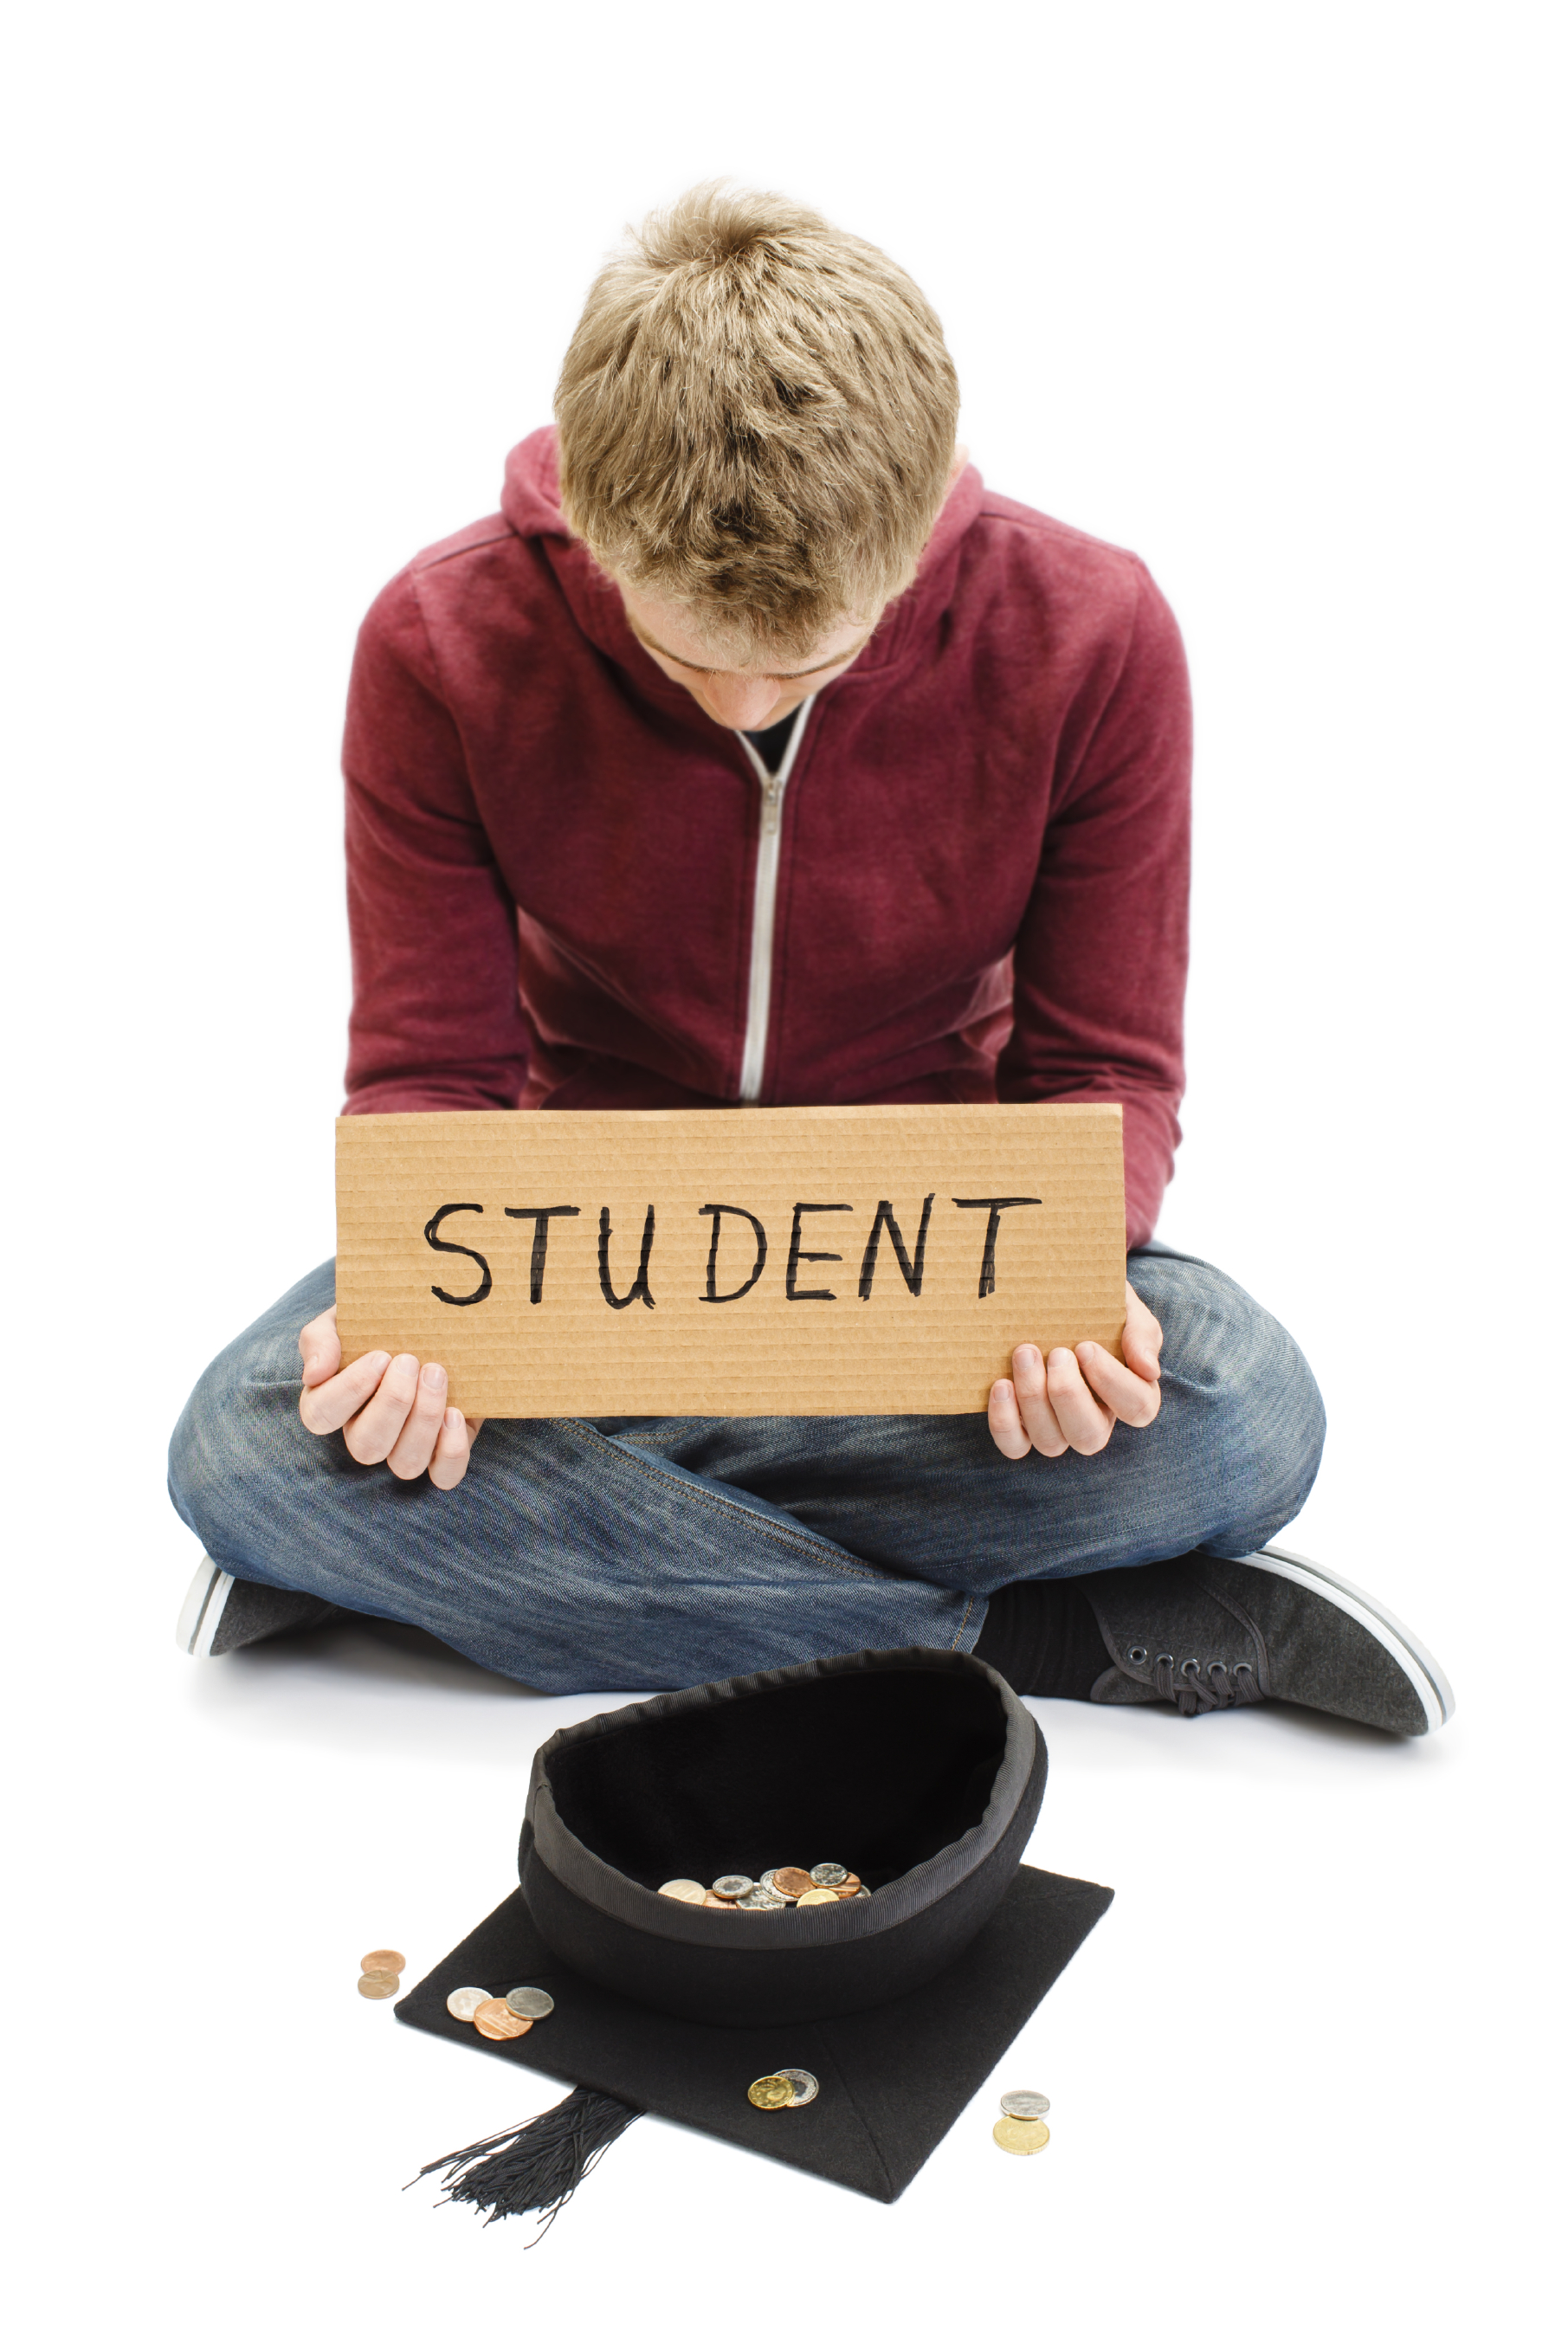 University Student Begging with Mortar Board - Education Costs